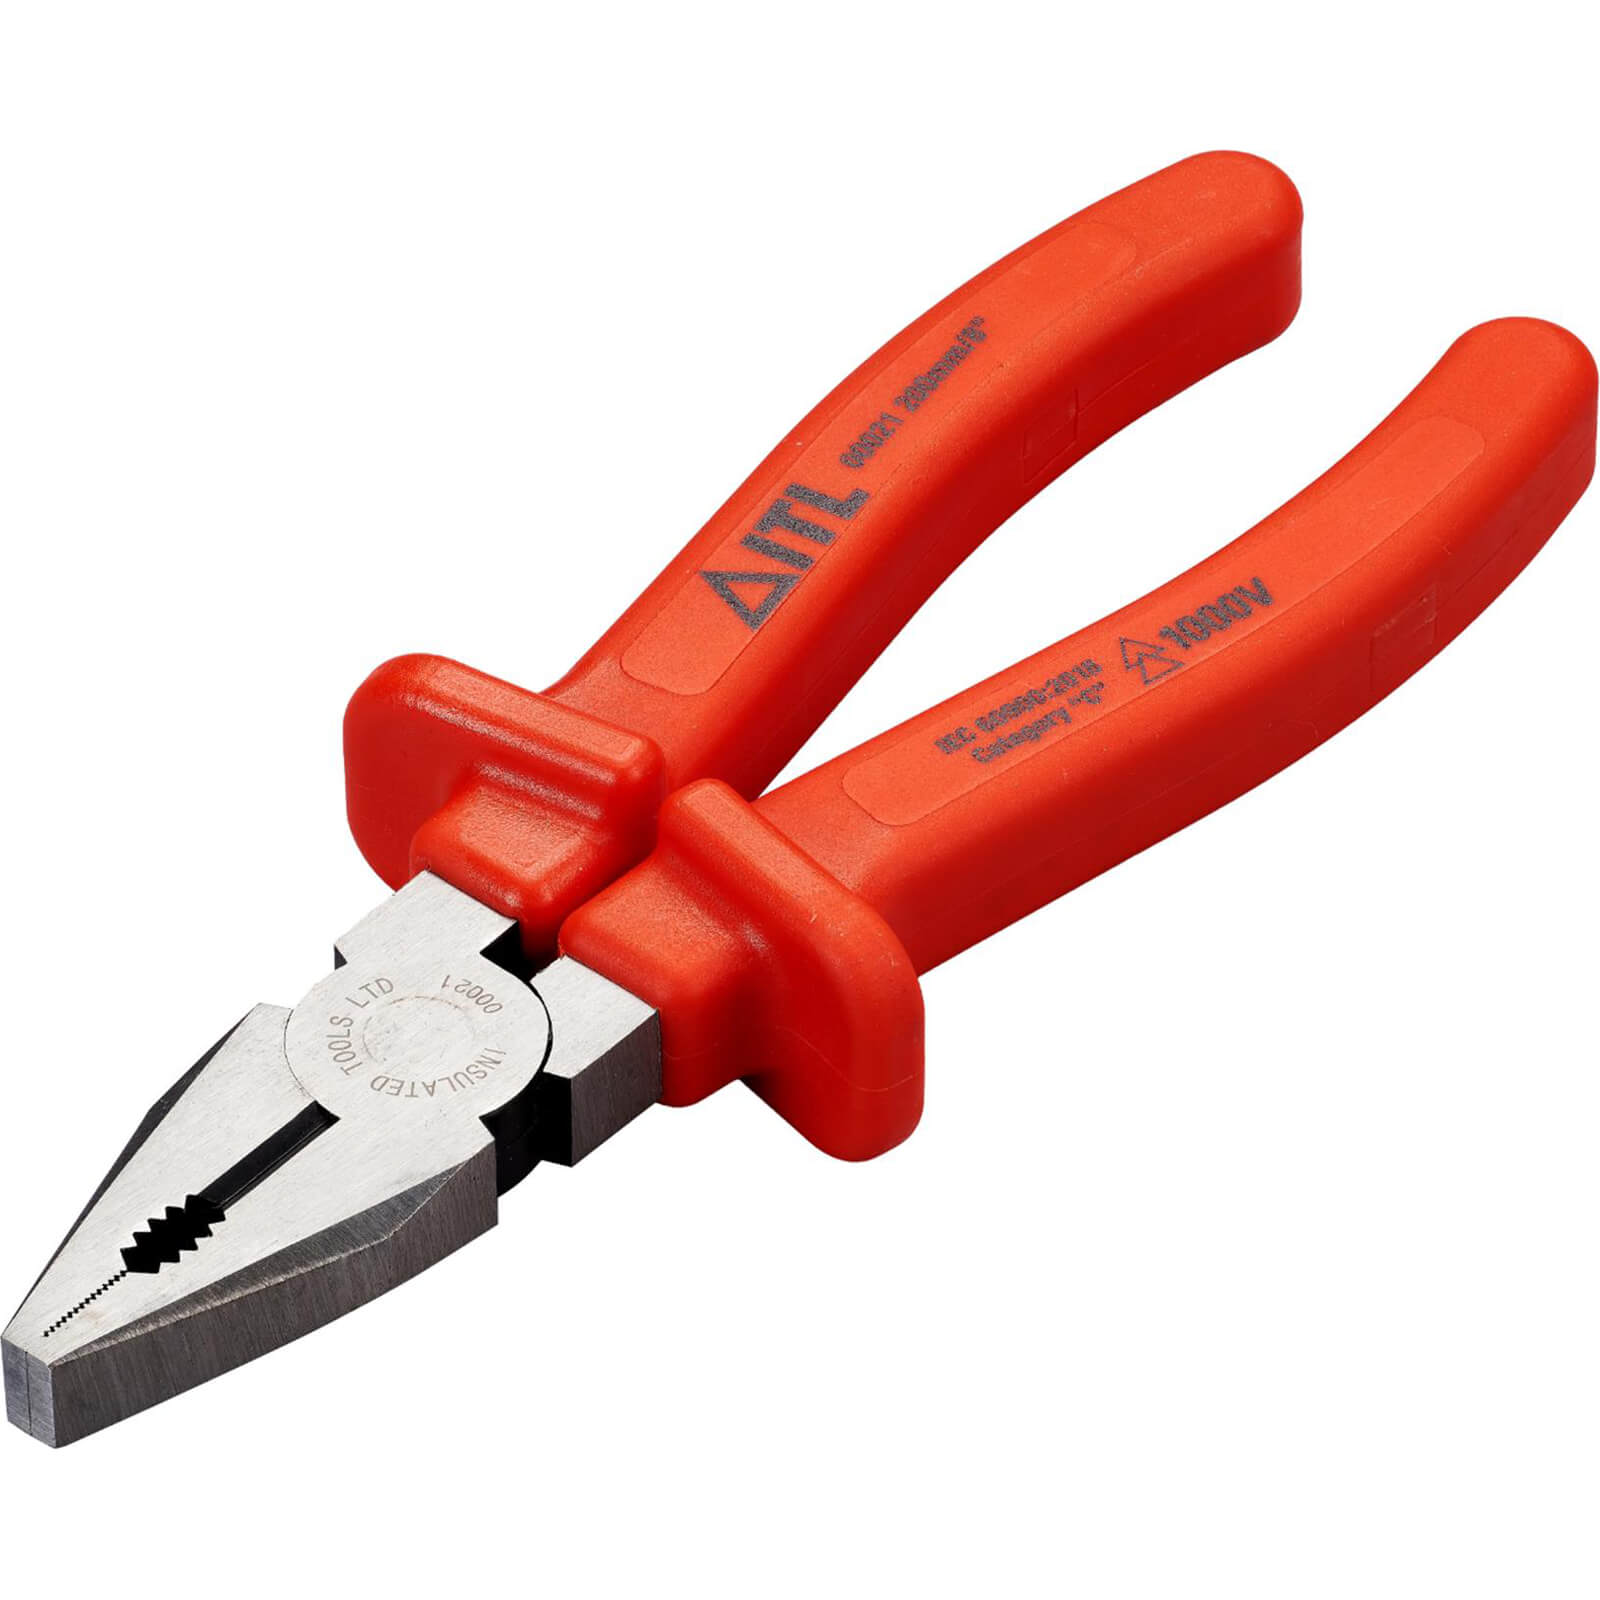 ITL Insulated Combination Pliers 200mm